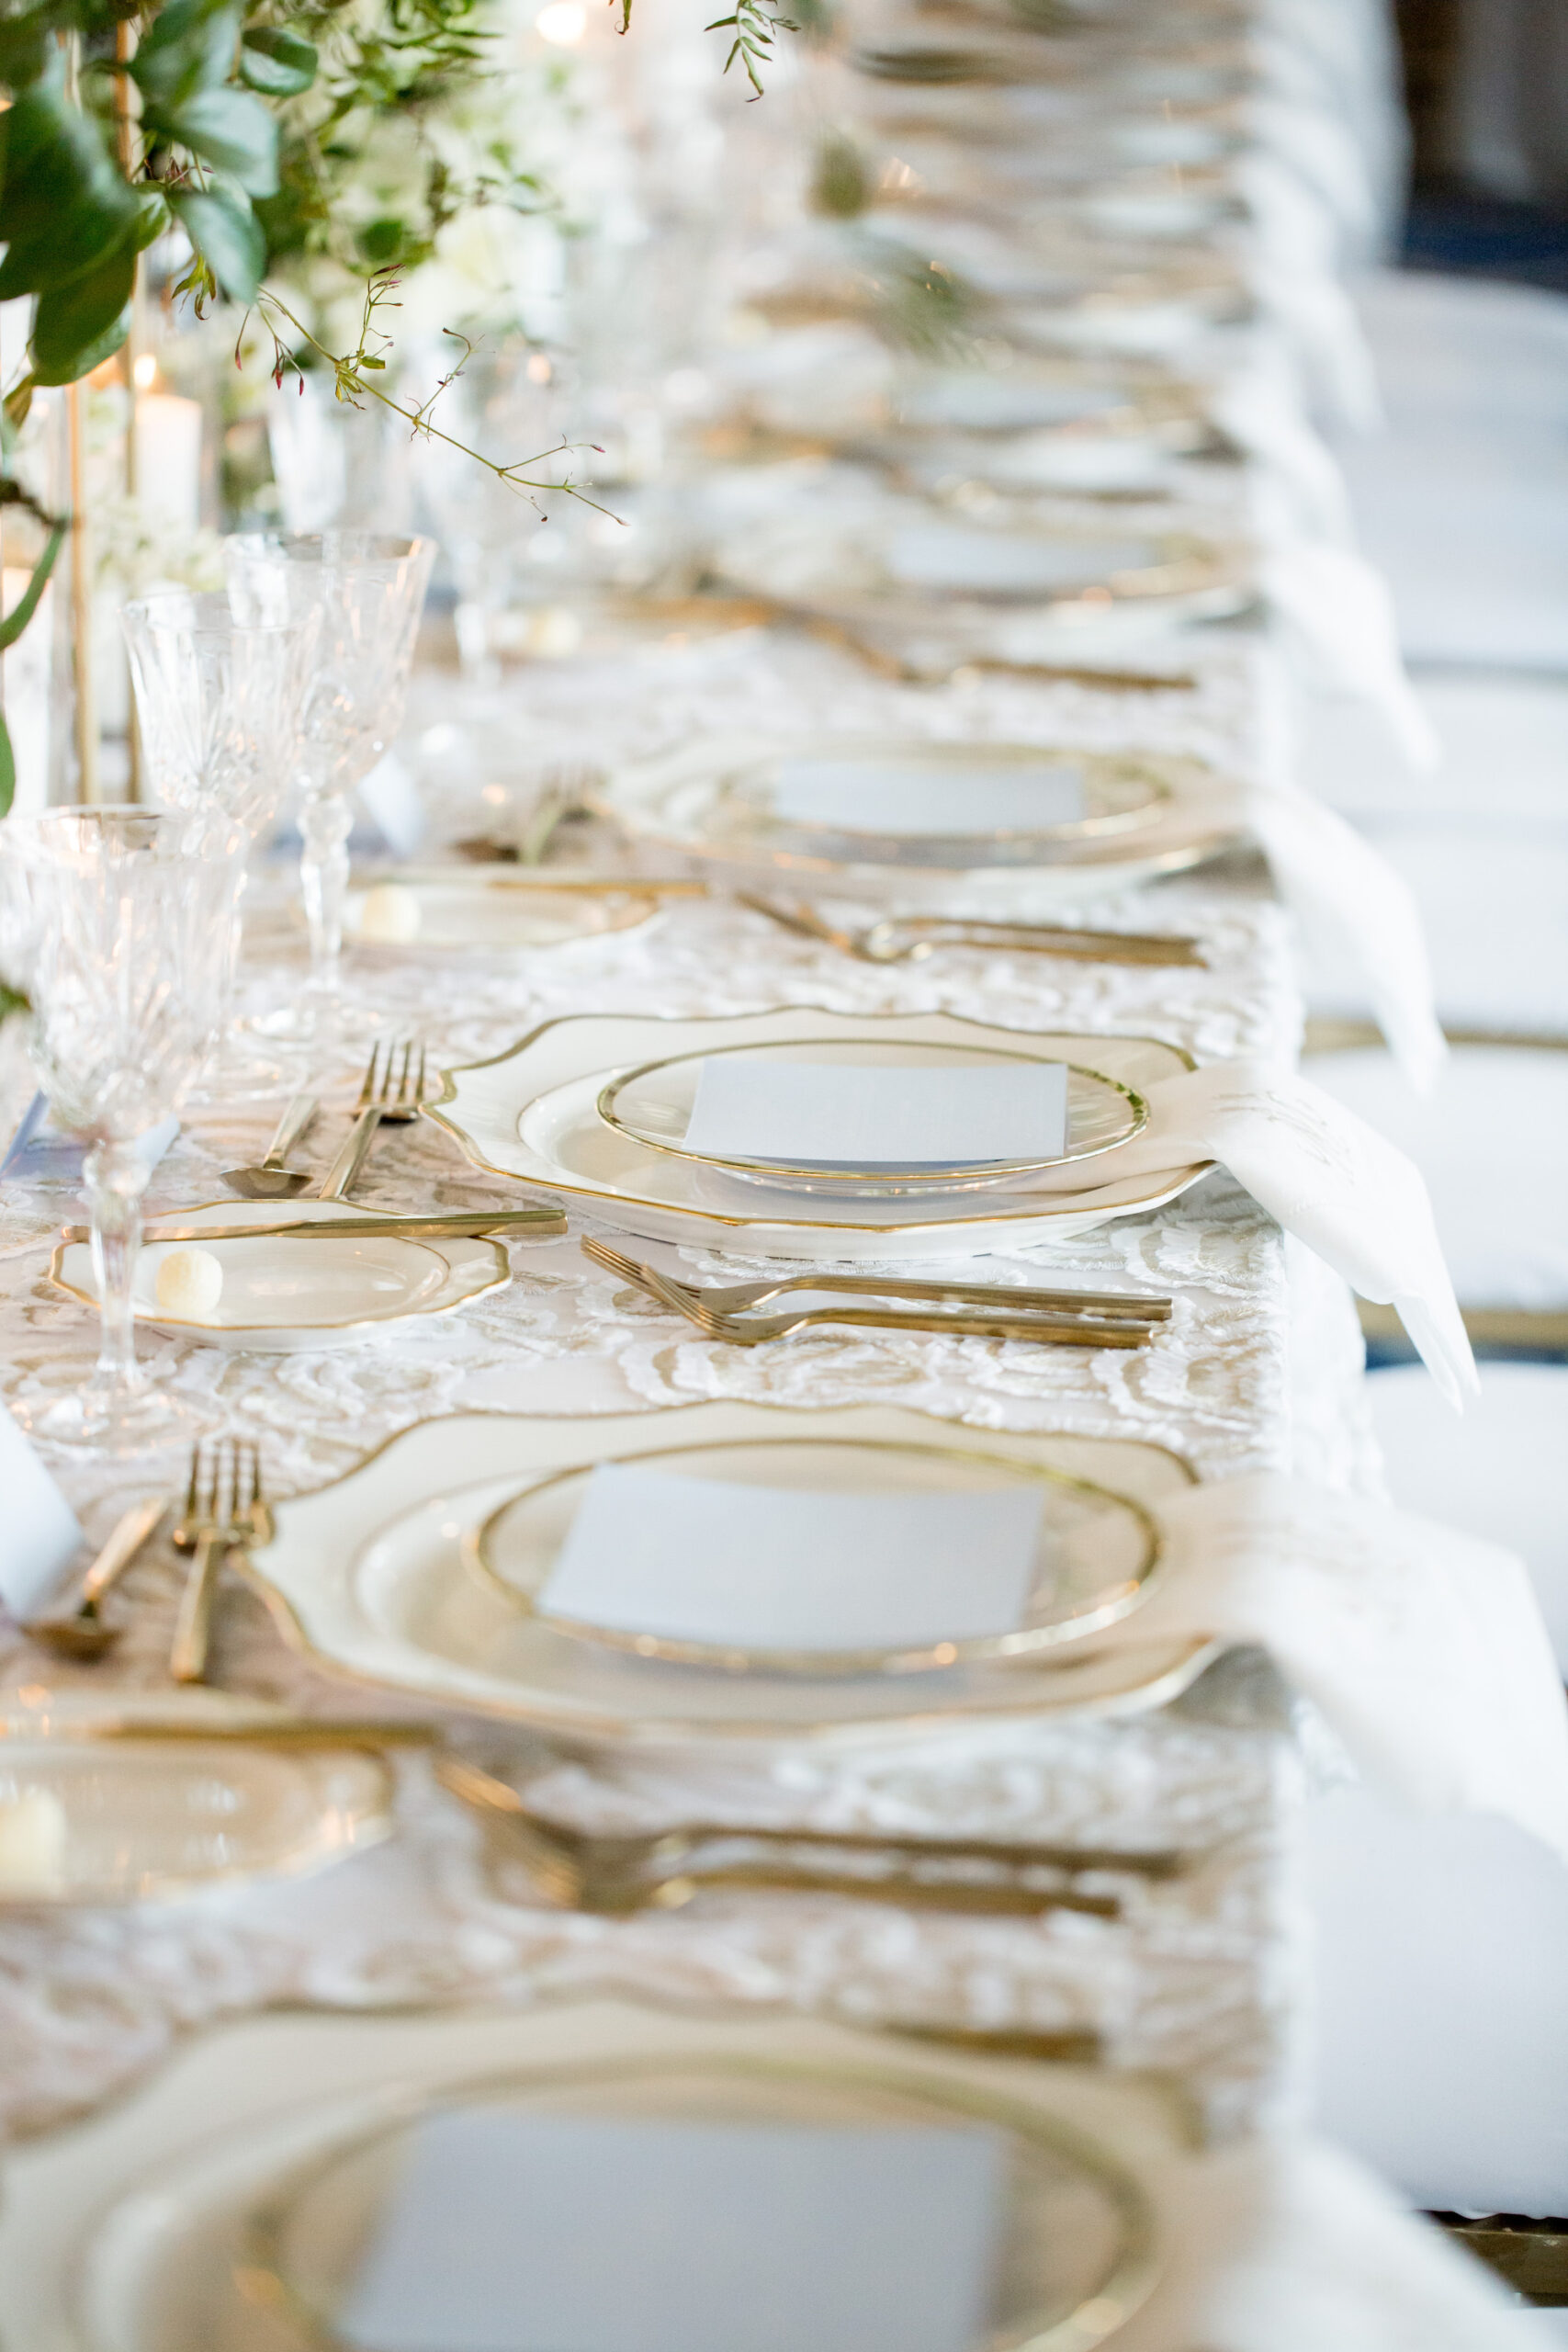 Timeless White and Gold Wedding Reception Long Feasting Table Place Setting Inspiration | Tampa Bay Planner Parties A La Carte